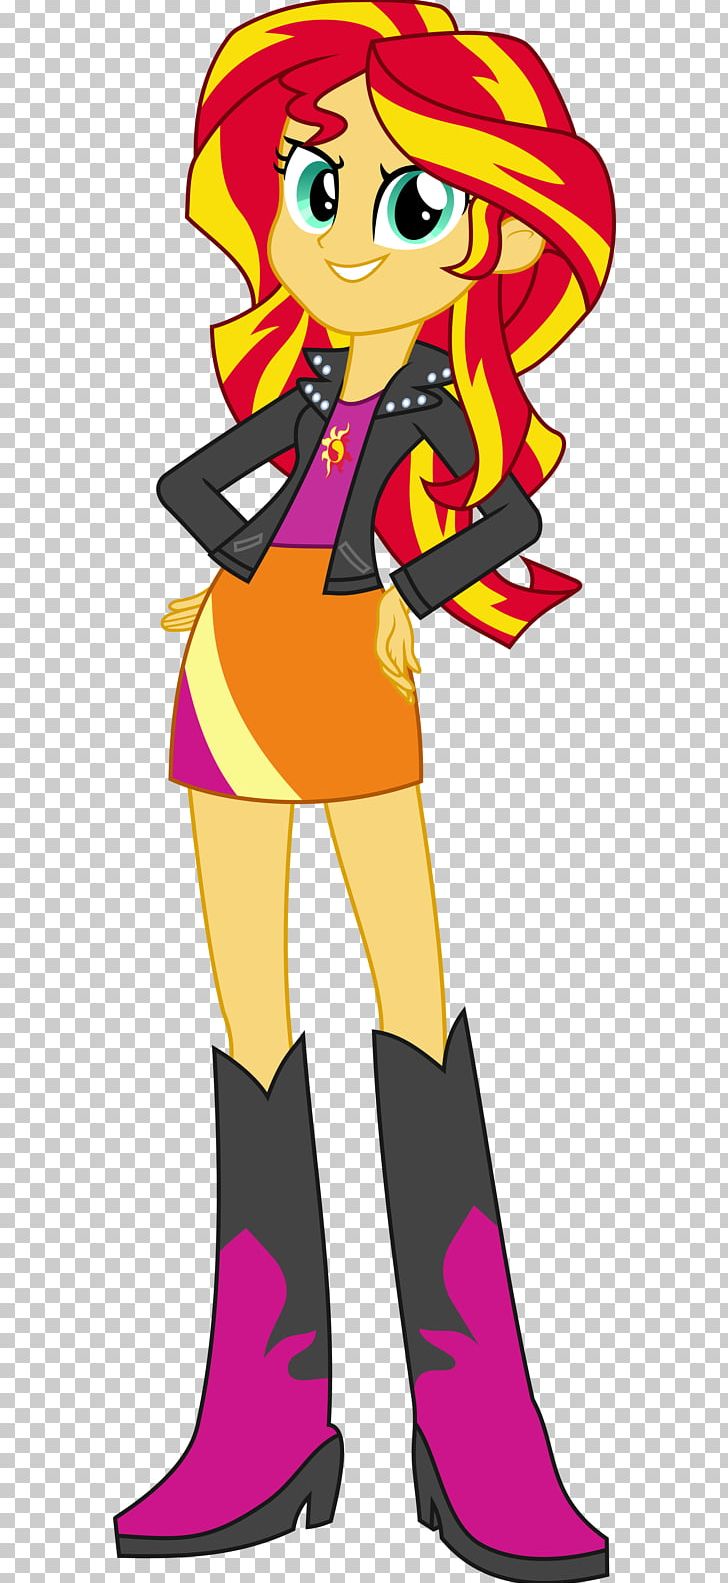 Sunset Shimmer Twilight Sparkle Rainbow Dash My Little Pony: Equestria Girls PNG, Clipart, Art, Artwork, Equestria, Fictional Character, Fluttershy Free PNG Download